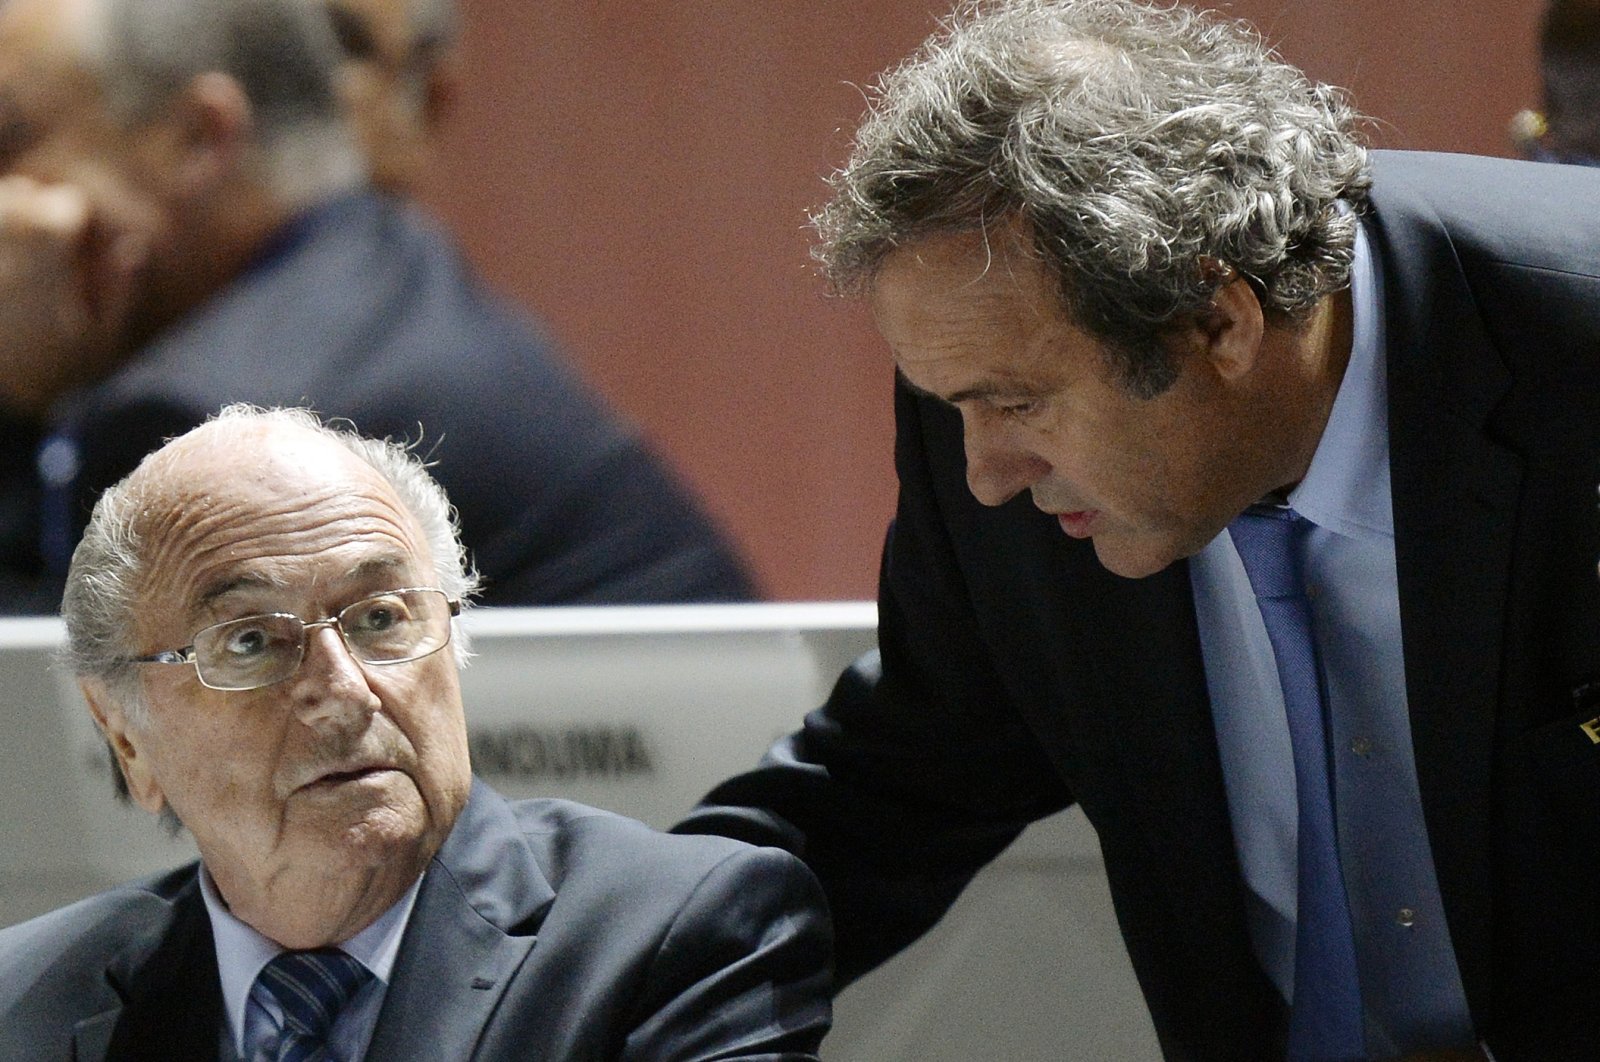 FIFA President Sepp Blatter, (L), and UEFA President Michel Platini engaged in conversation during the 65th FIFA Congress held at the Hallenstadion in Zurich, Switzerland, on Friday, May 29, 2015. (AP File Photo)